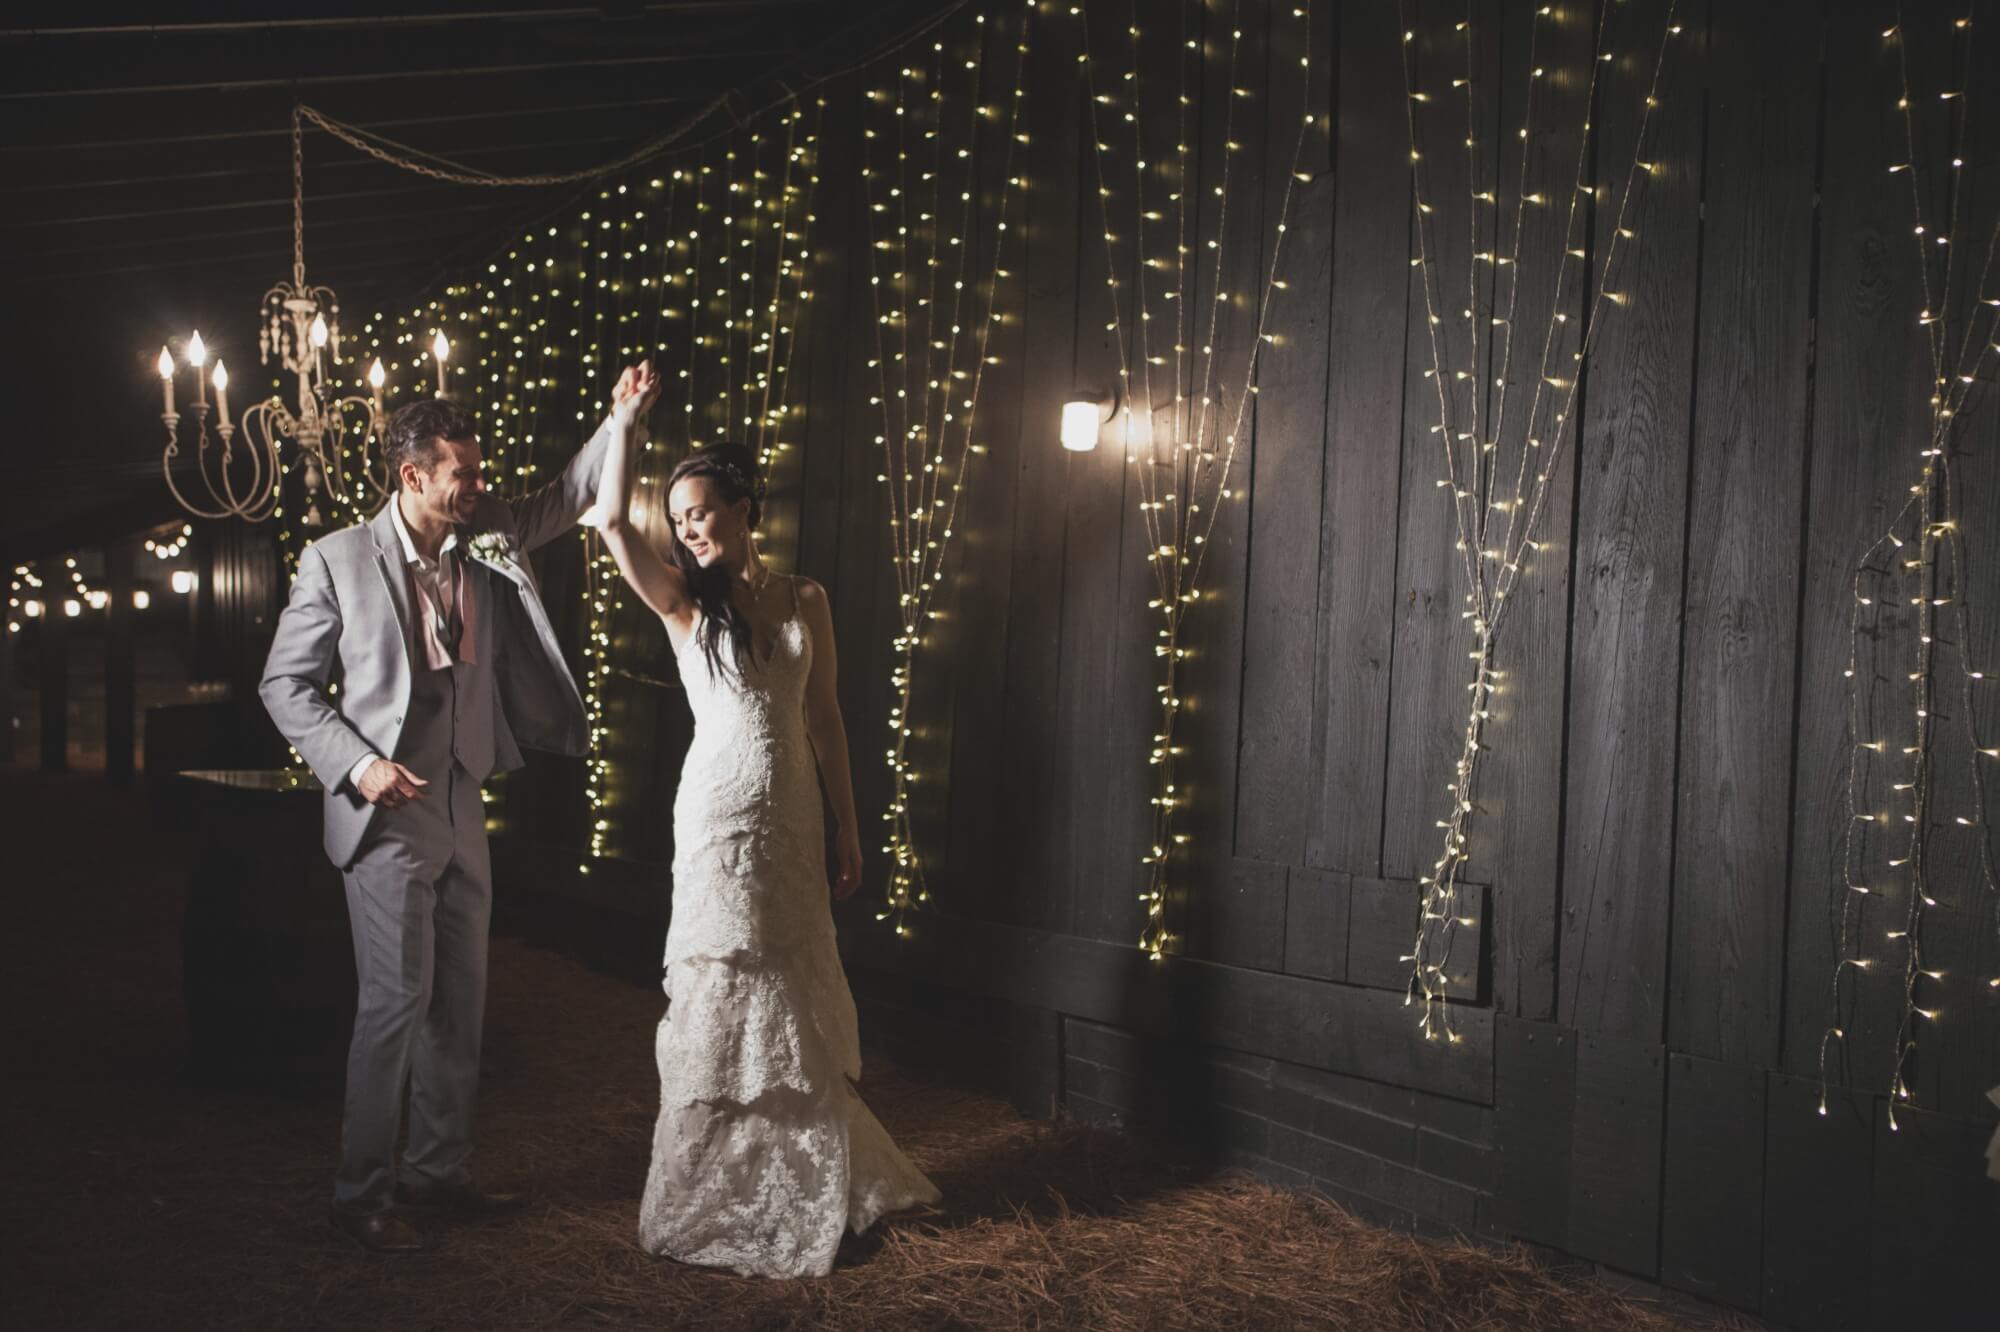 Groom spins bride in the reception barn after their wedding ceremony at David and Jennifer's Cedarwood spring wedding in Nashville TN, photography by Krista Lee. 